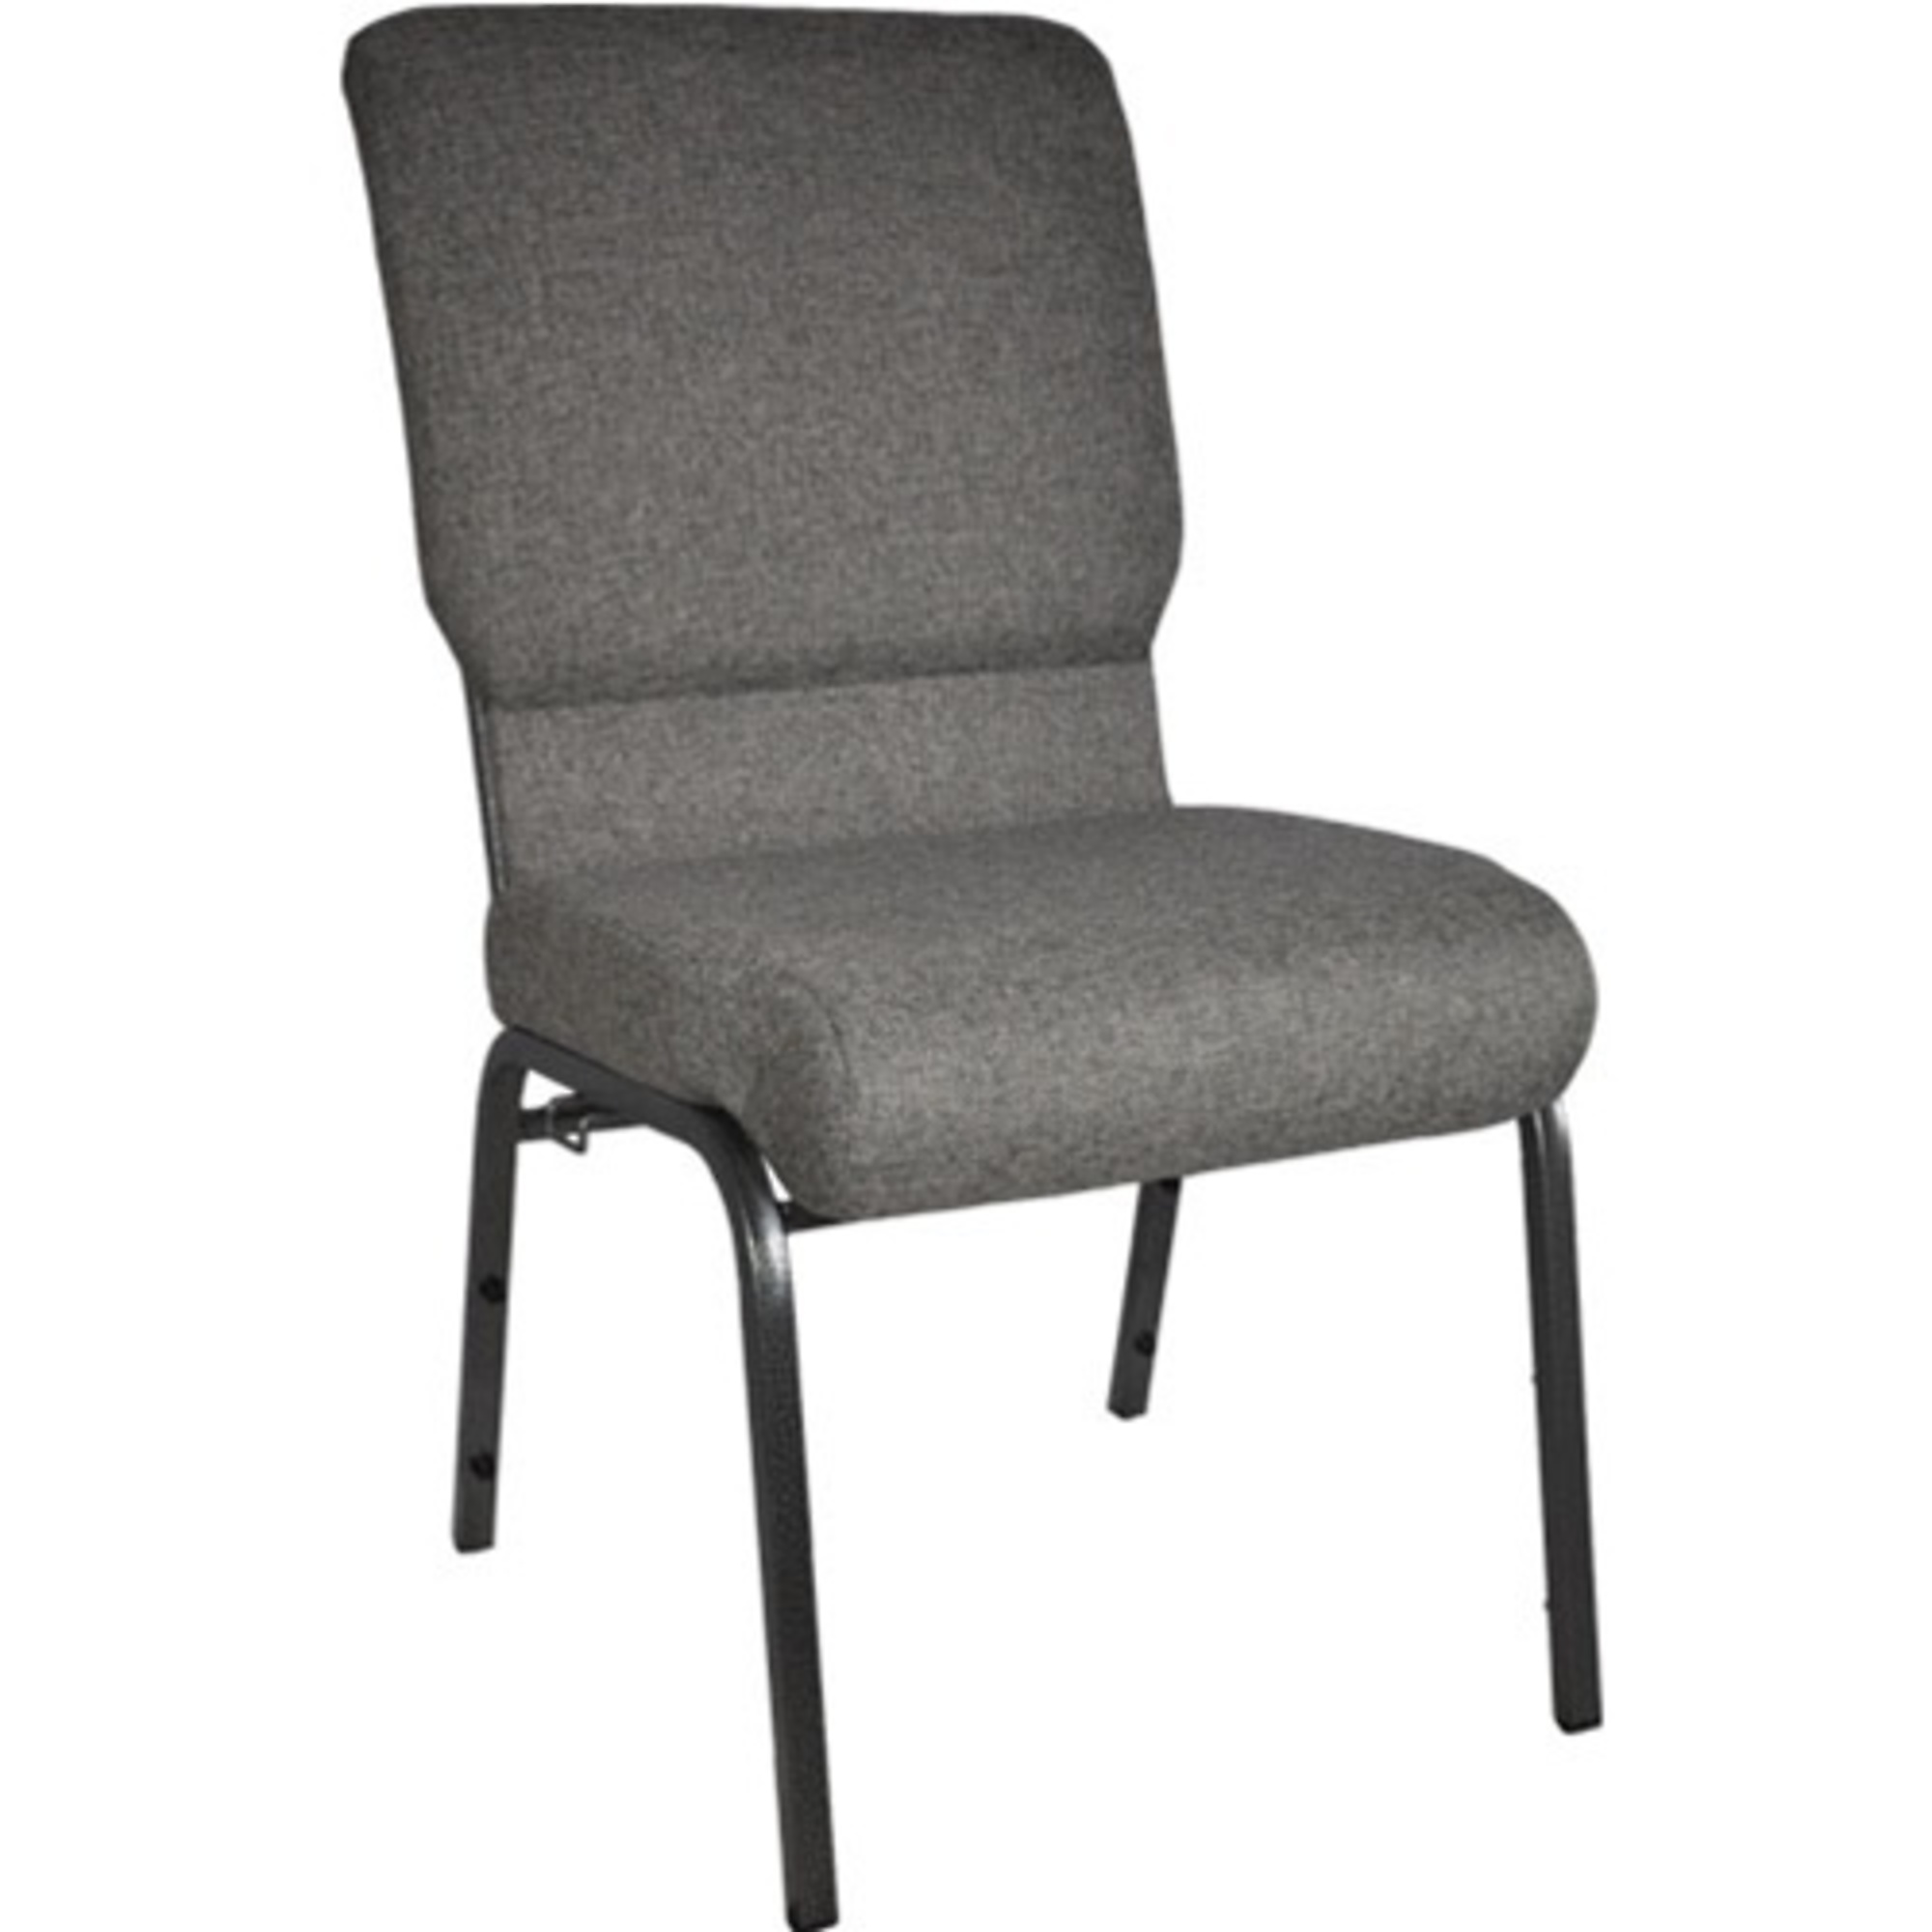 Flash Furniture, Charcoal Gray Church Chair 18.5Inch Wide, Primary Color Gray, Included (qty.) 1, Model PCHT185111